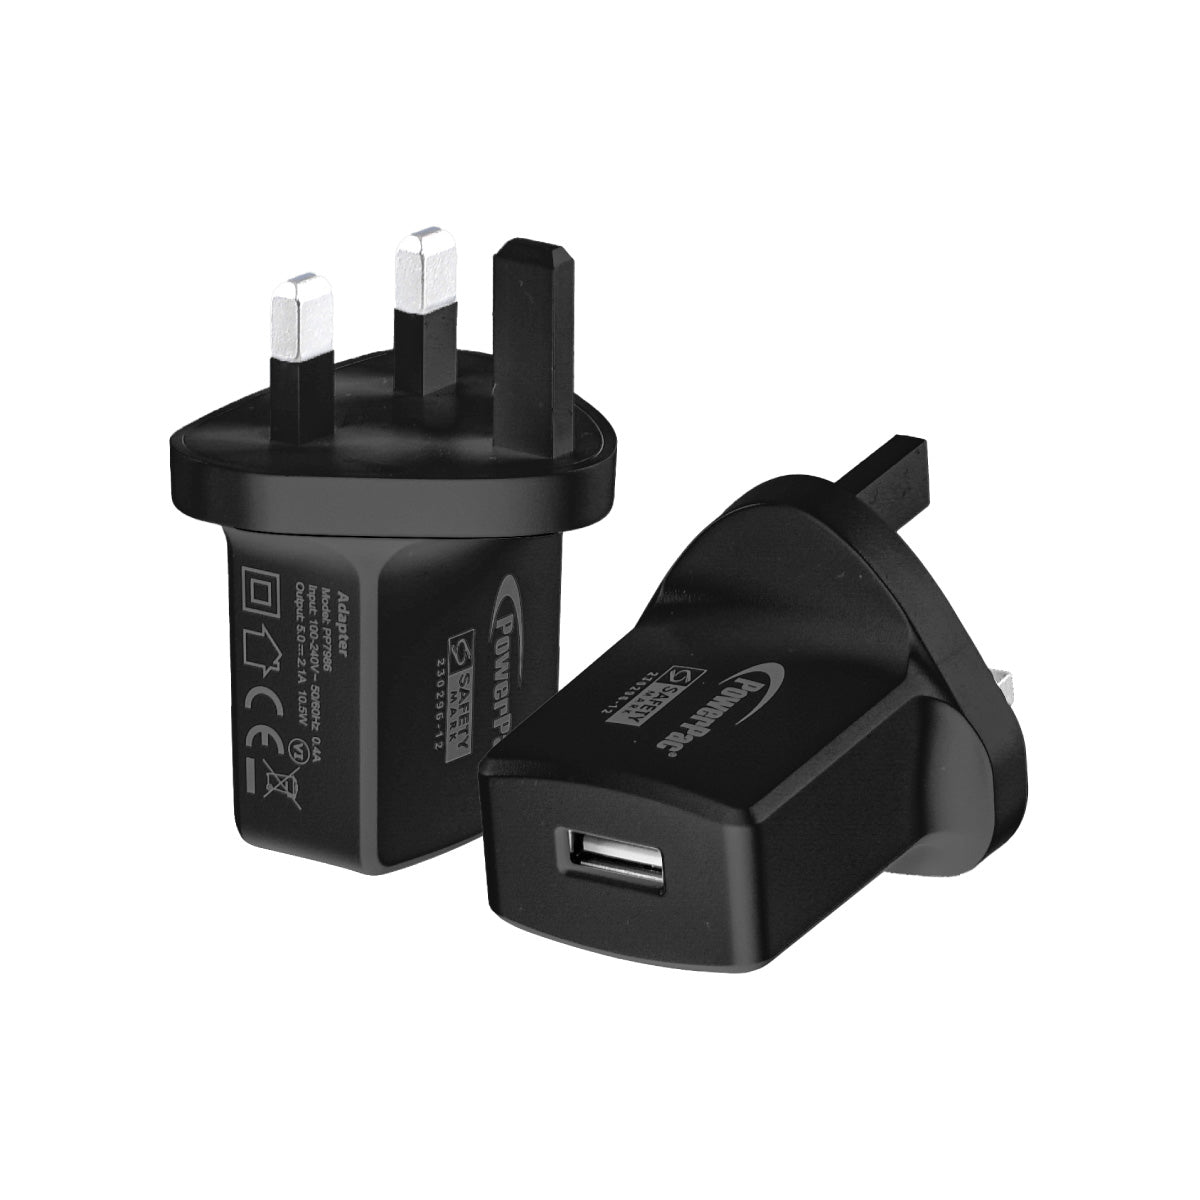 10.5W Charger Fast Charge QC3.0, PD 3.0 USB Smart Charger, TYPE A (PP7986) Black